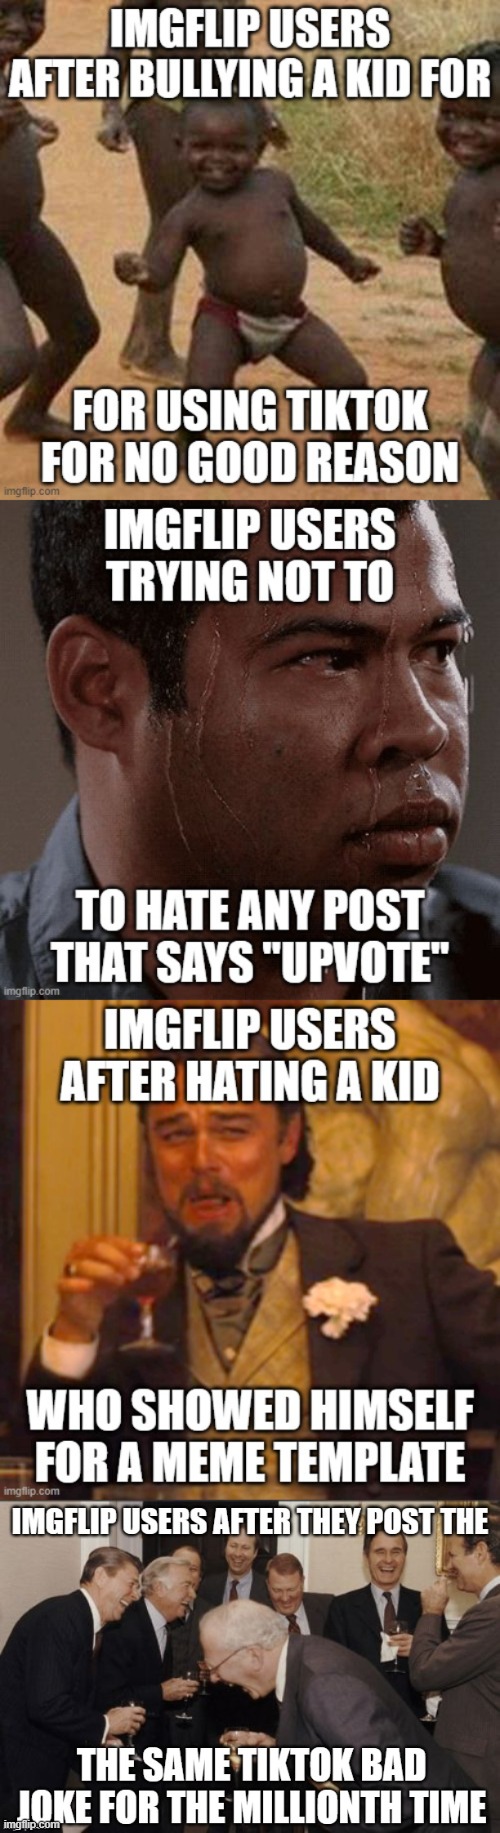 the more memes the merrier | image tagged in imgflip users | made w/ Imgflip meme maker